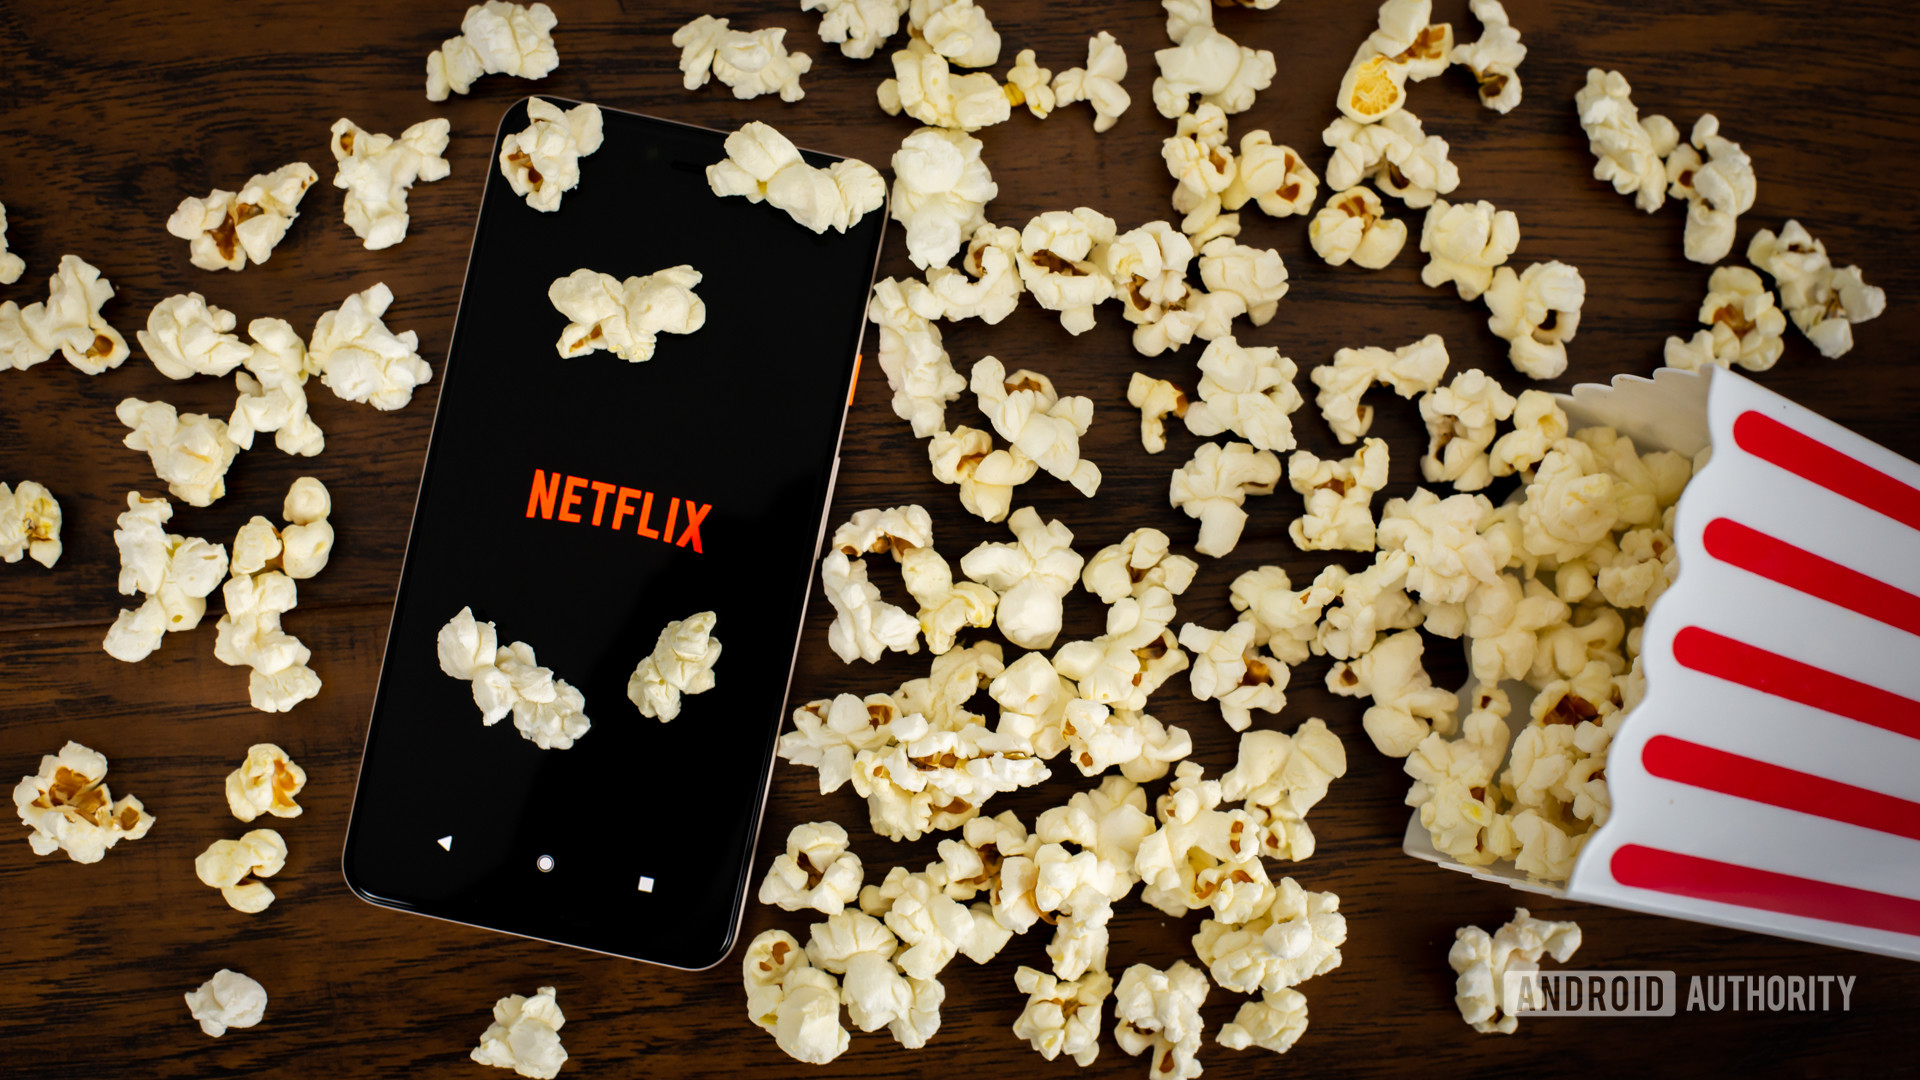 Netflix with popcorn stock photo 1 - The best digital gifts